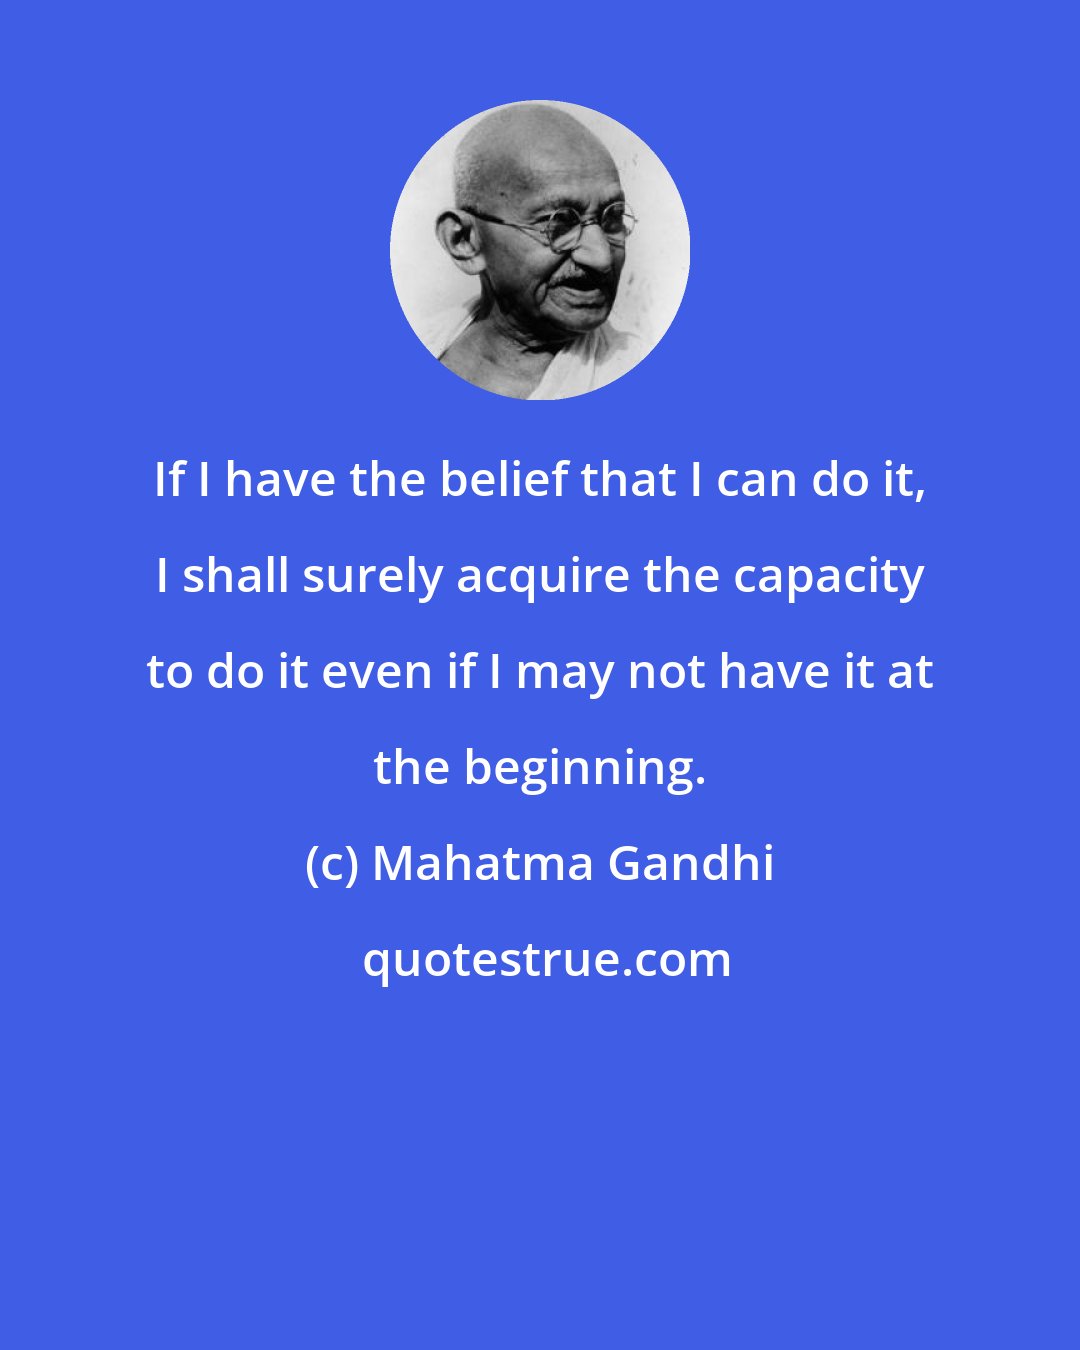 Mahatma Gandhi: If I have the belief that I can do it, I shall surely acquire the capacity to do it even if I may not have it at the beginning.